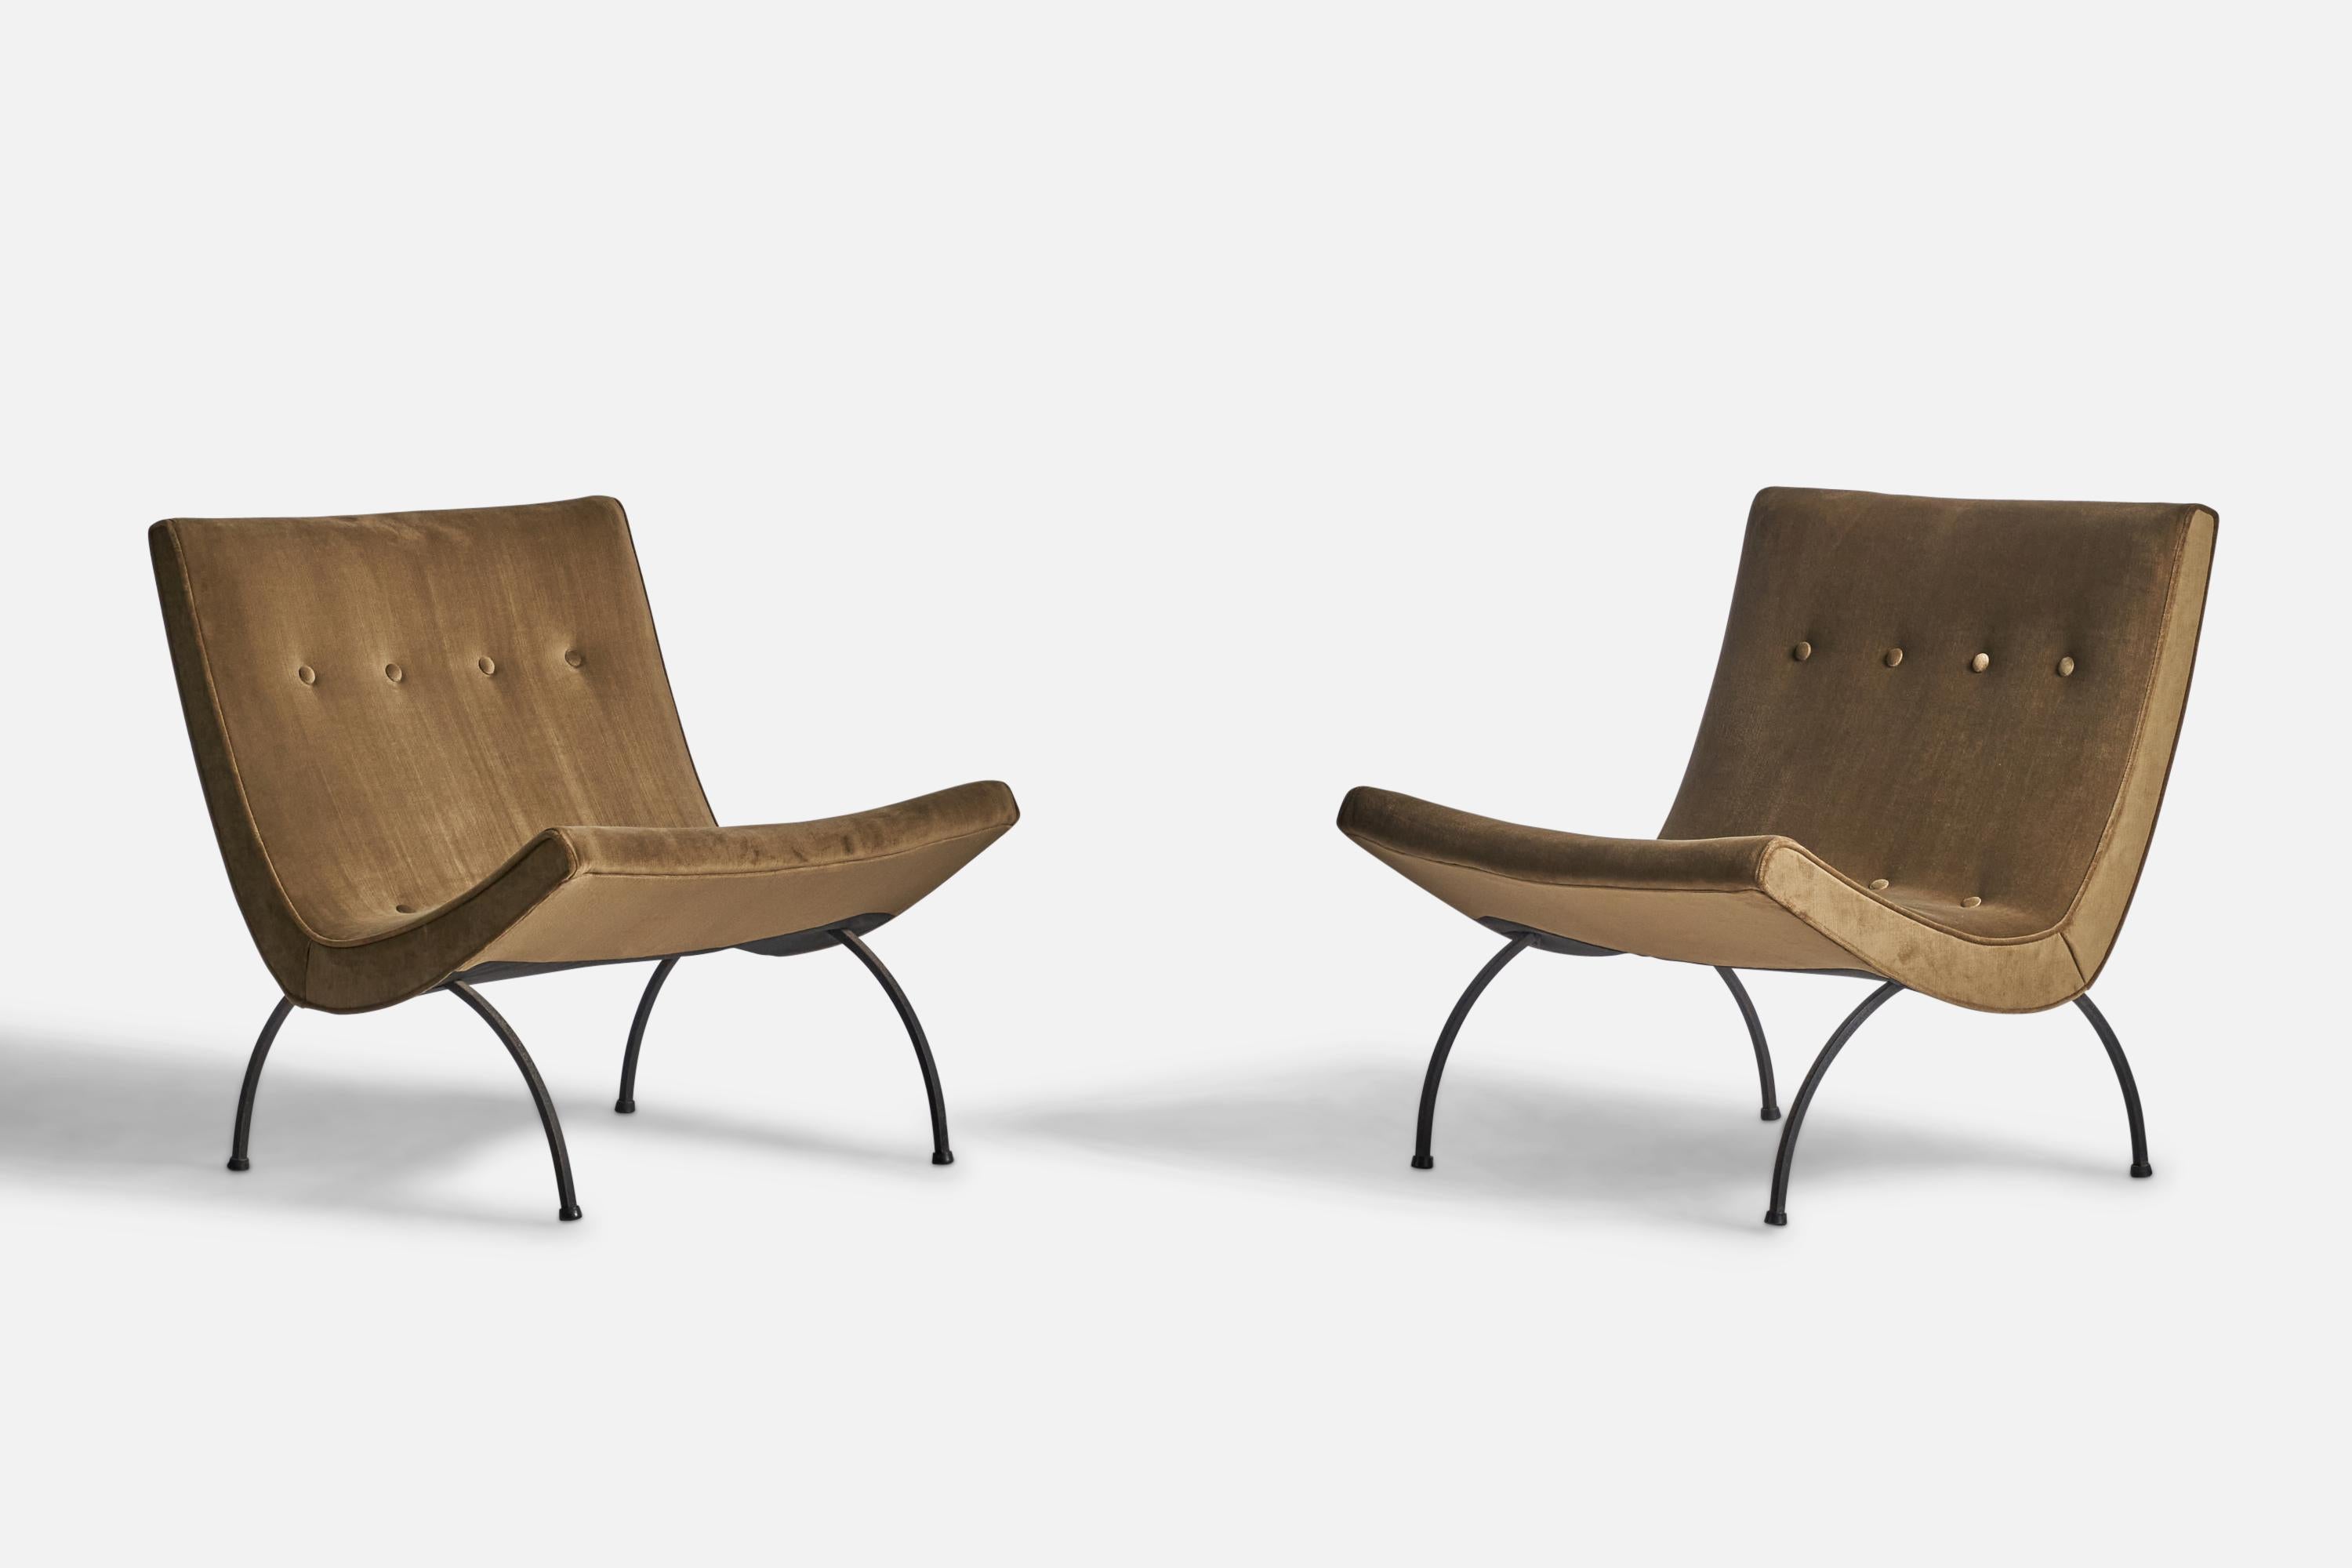 A pair of black-painted iron and beige brown velvet fabric lounge chairs or slipper chairs, designed by Milo Baughman and produced by Thayer Coggin, High Point, North Carolina, USA, 1950s.

12” seat height